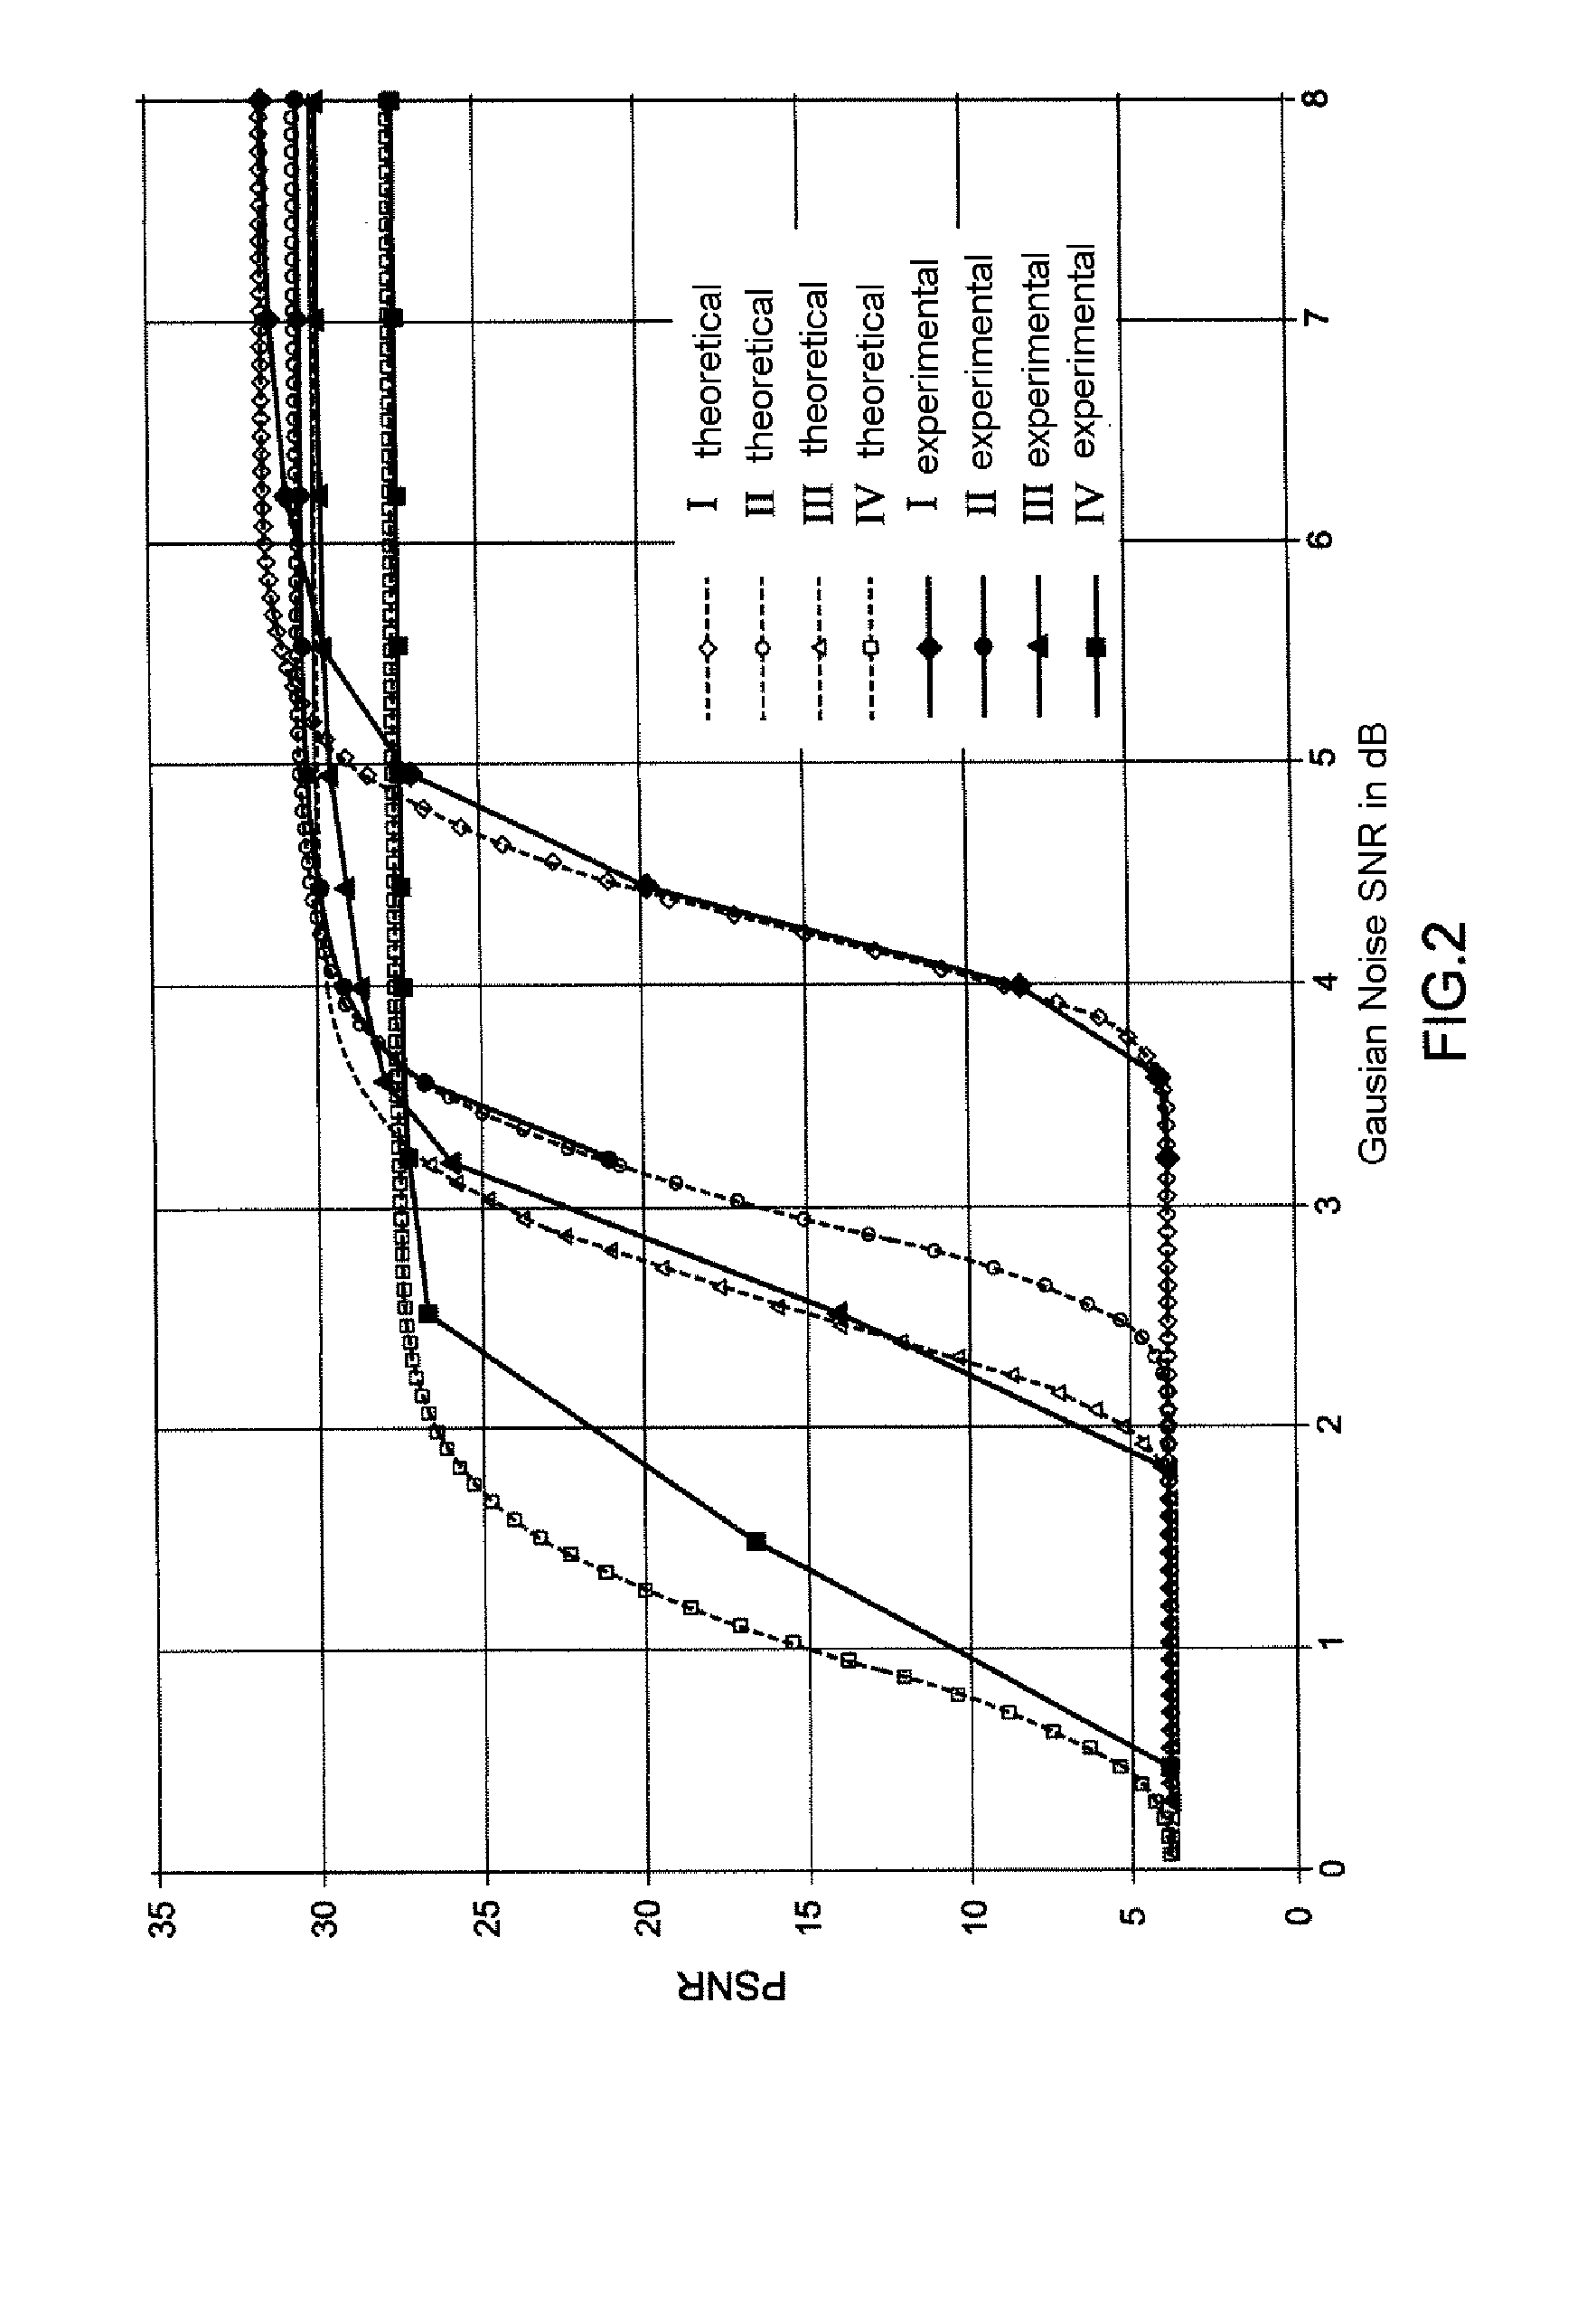 Method allowing compression and protection parameters to be determined for the transmission of multimedia data over a wireless data channel